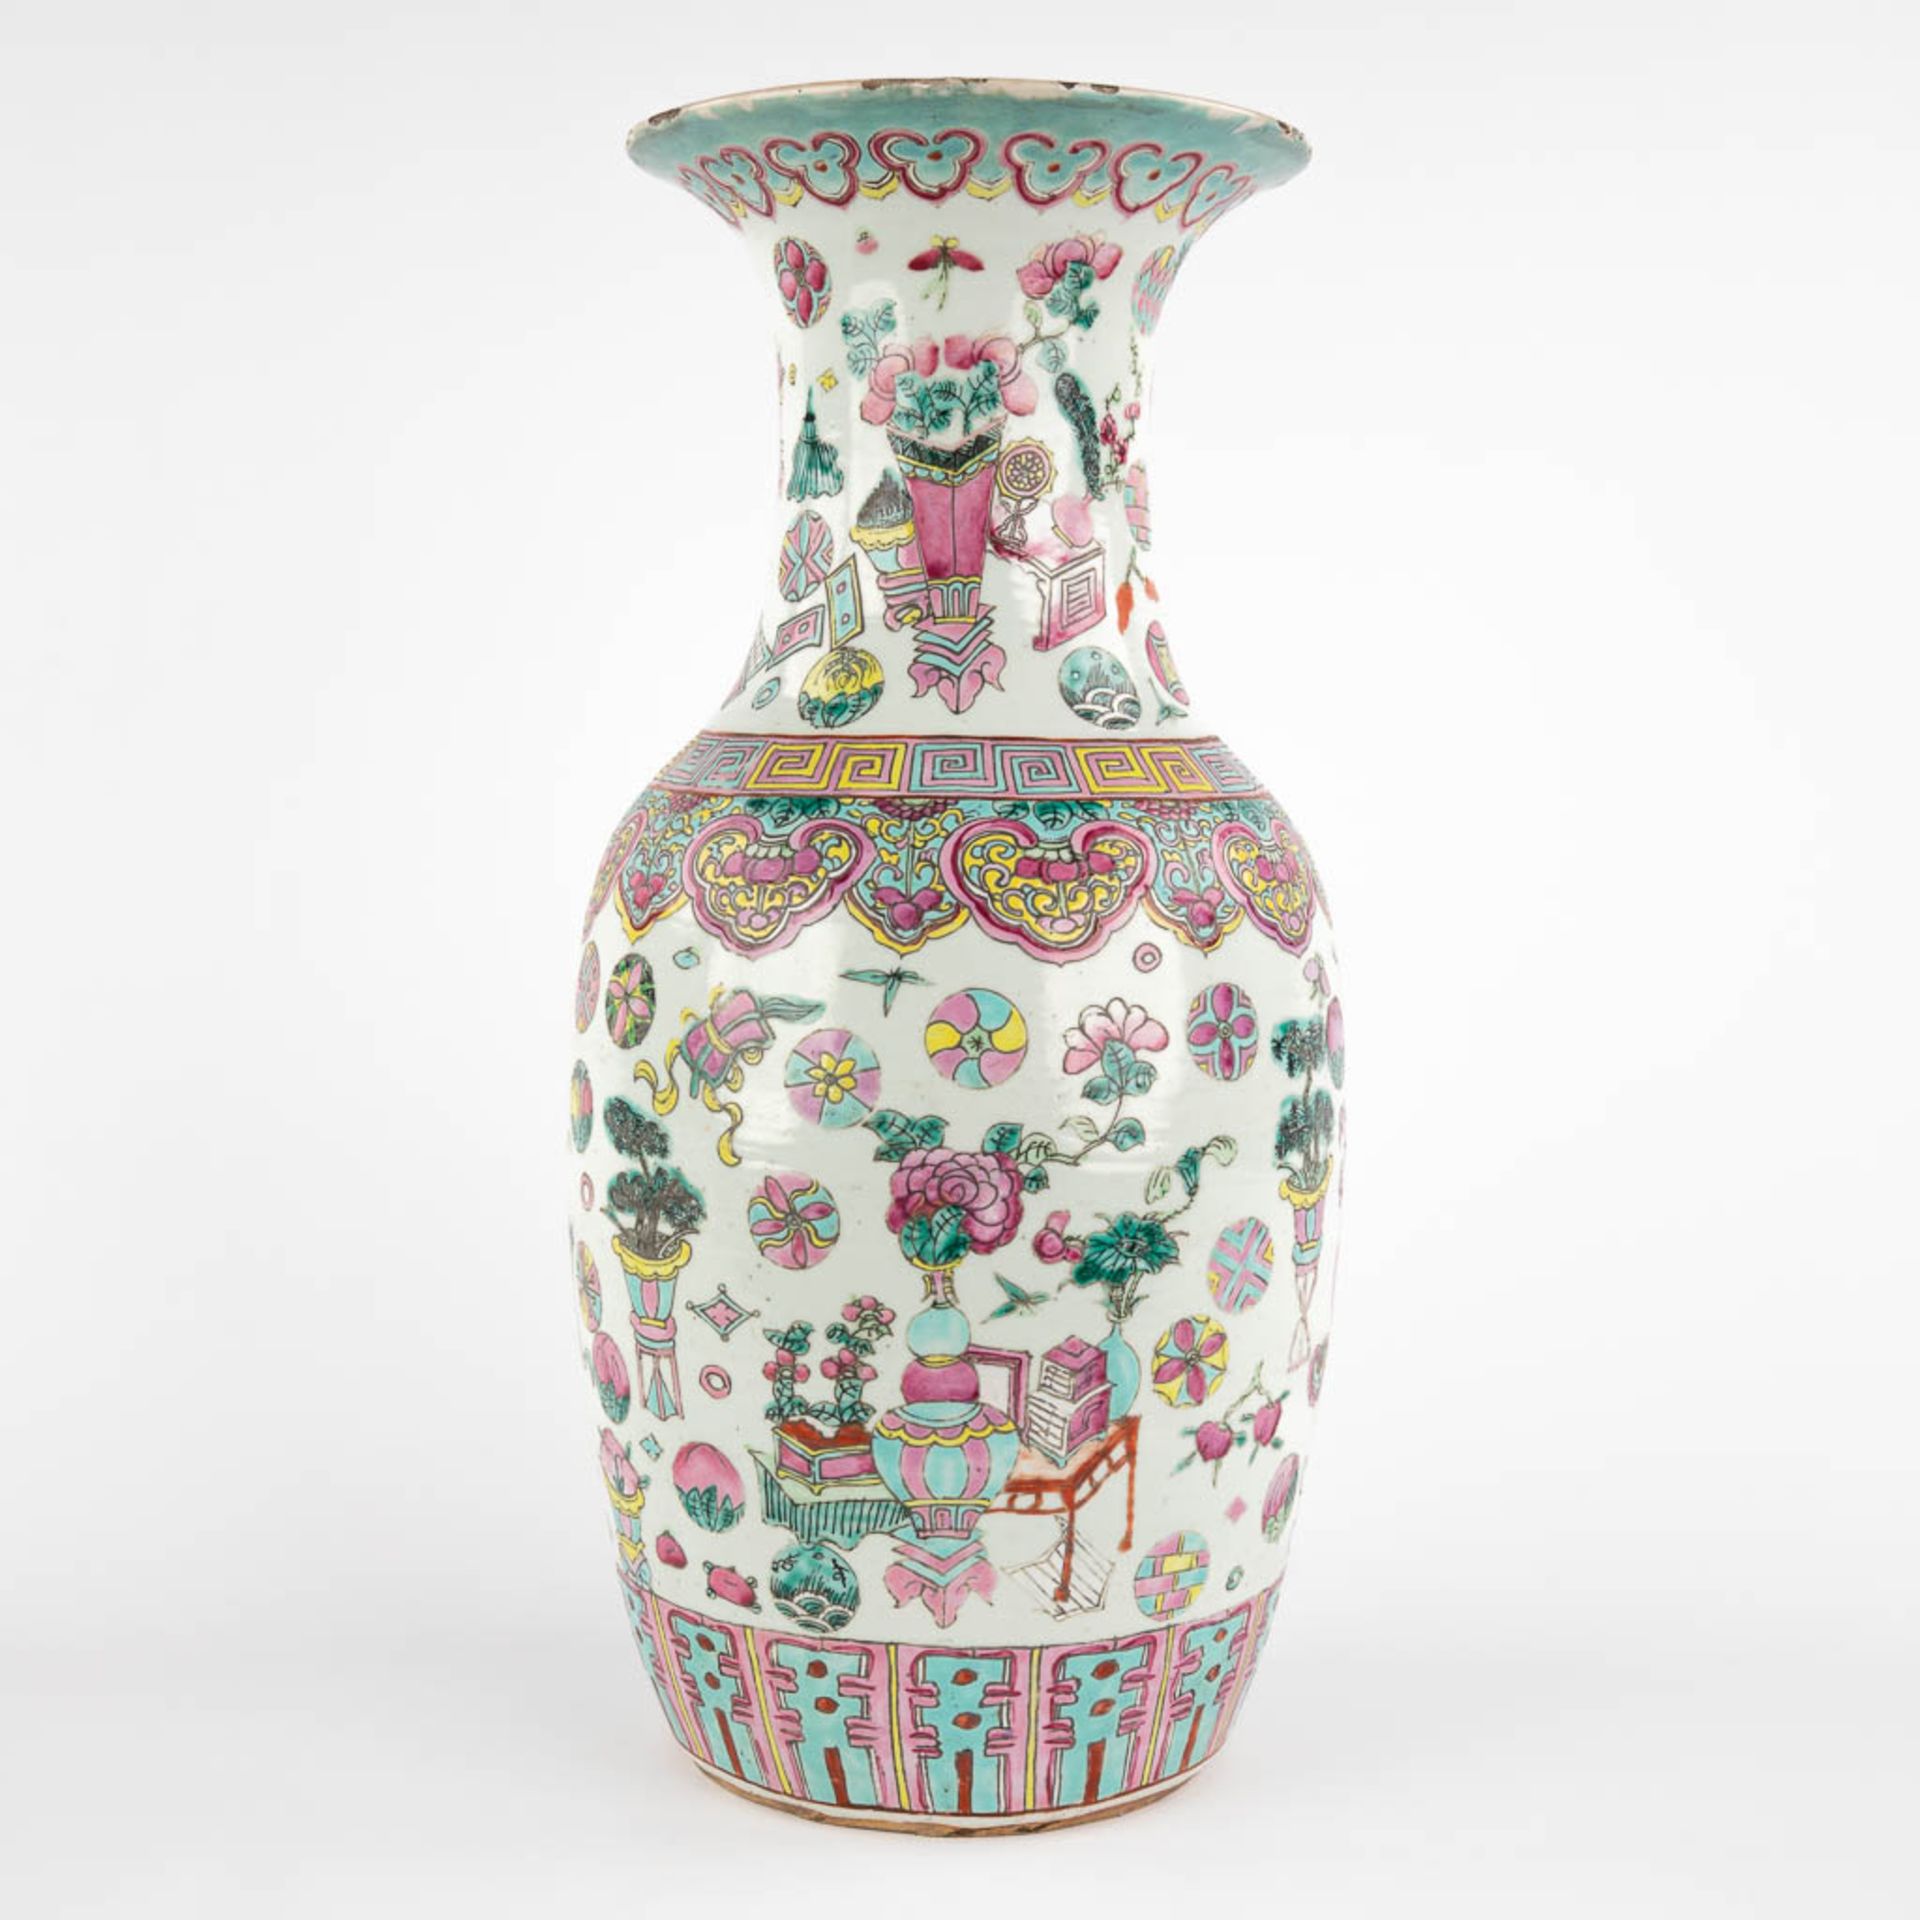 A Chinese vase with a decor of antiquities. 19th/20th C. (H:44 x D:21 cm) - Image 3 of 11